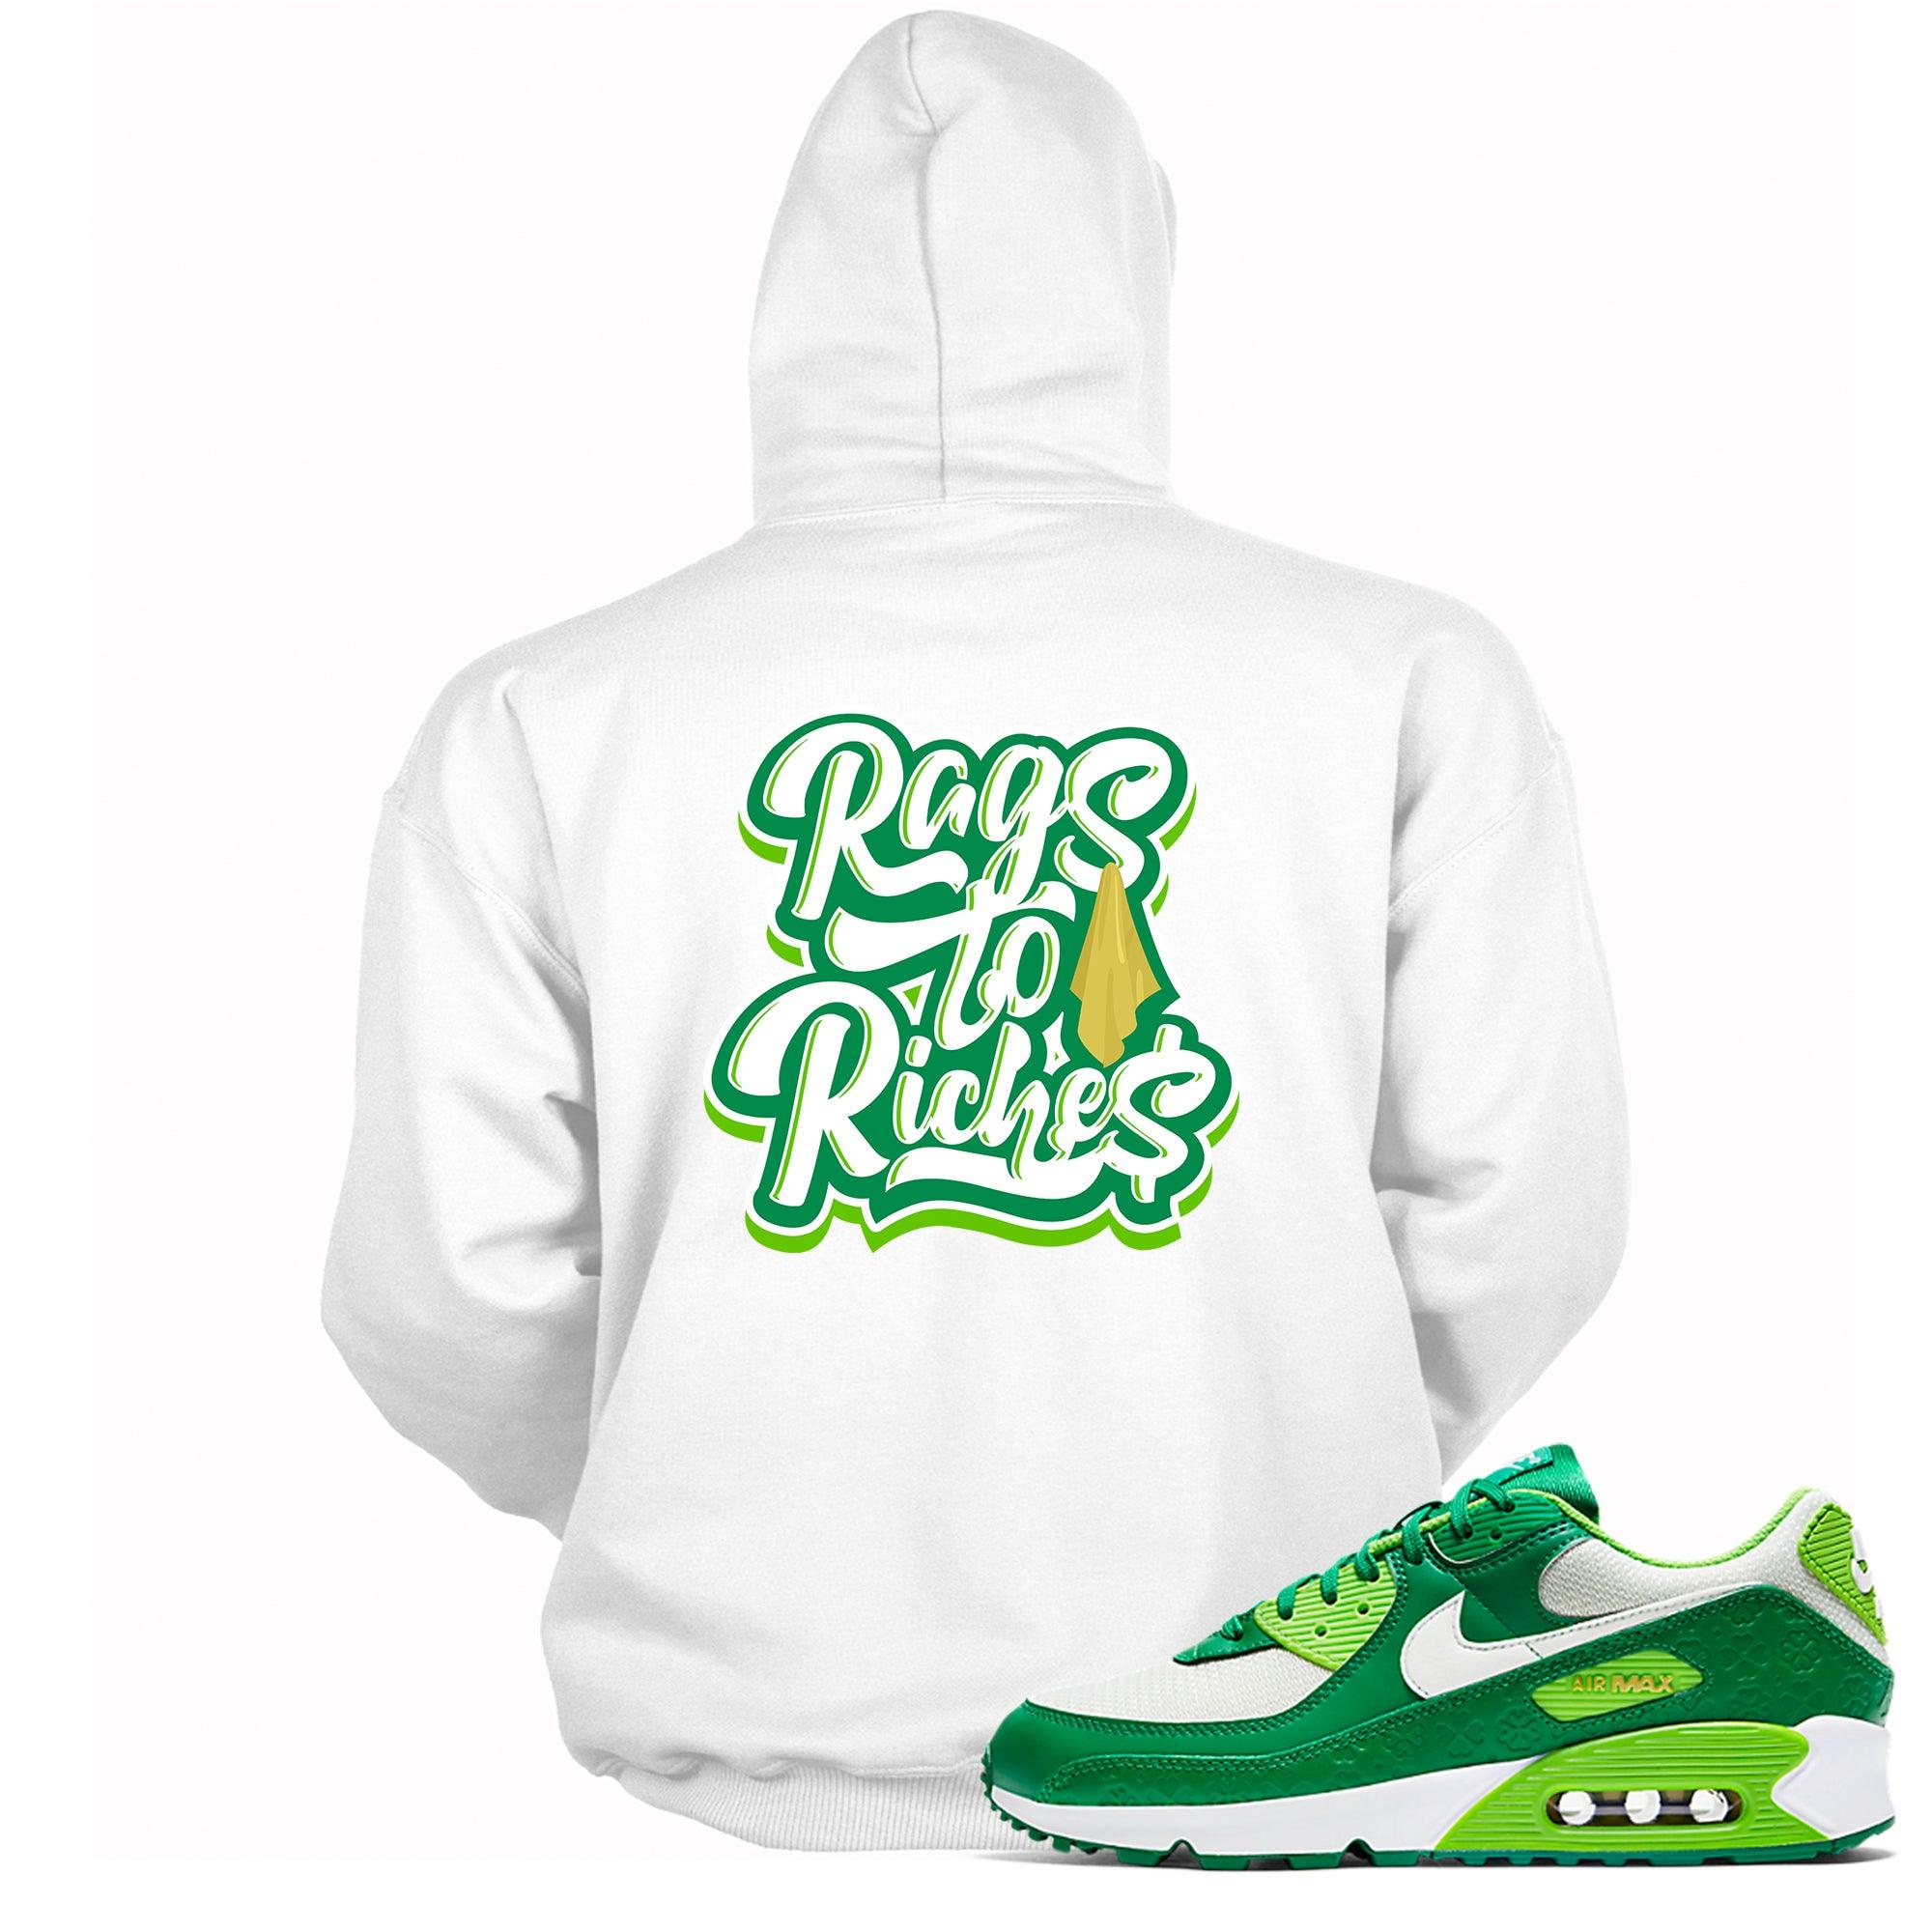 Rags To Riches Hoodie Nike Air Max 90 St Patricks Day 2021 photo